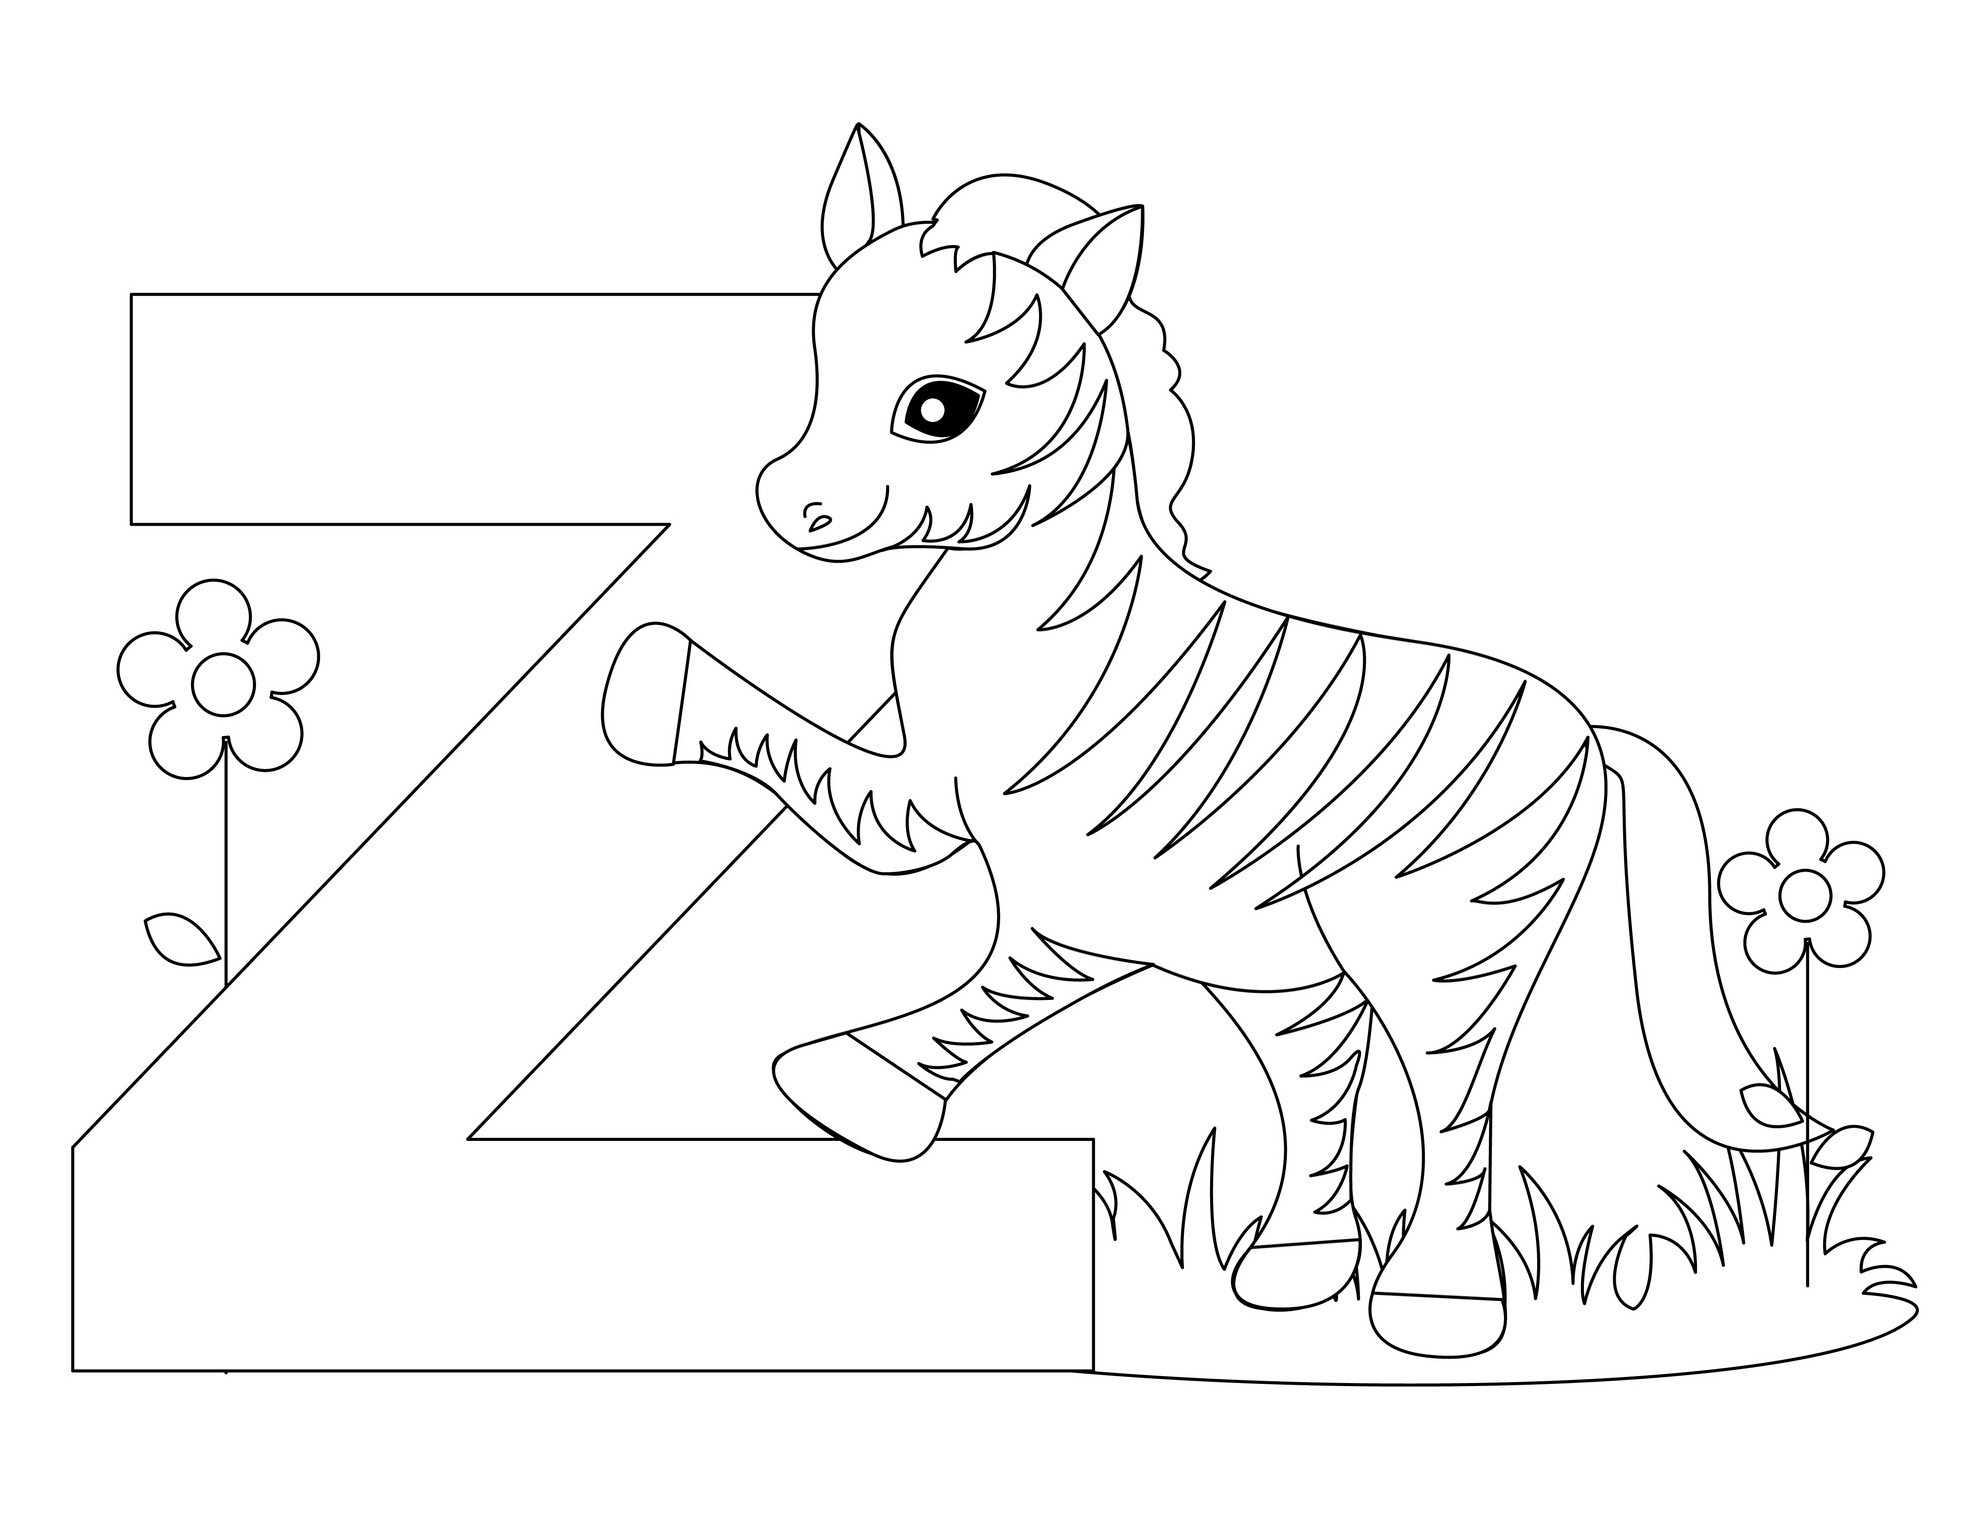 Free Printable Alphabet Coloring Pages for Kids - Best ...